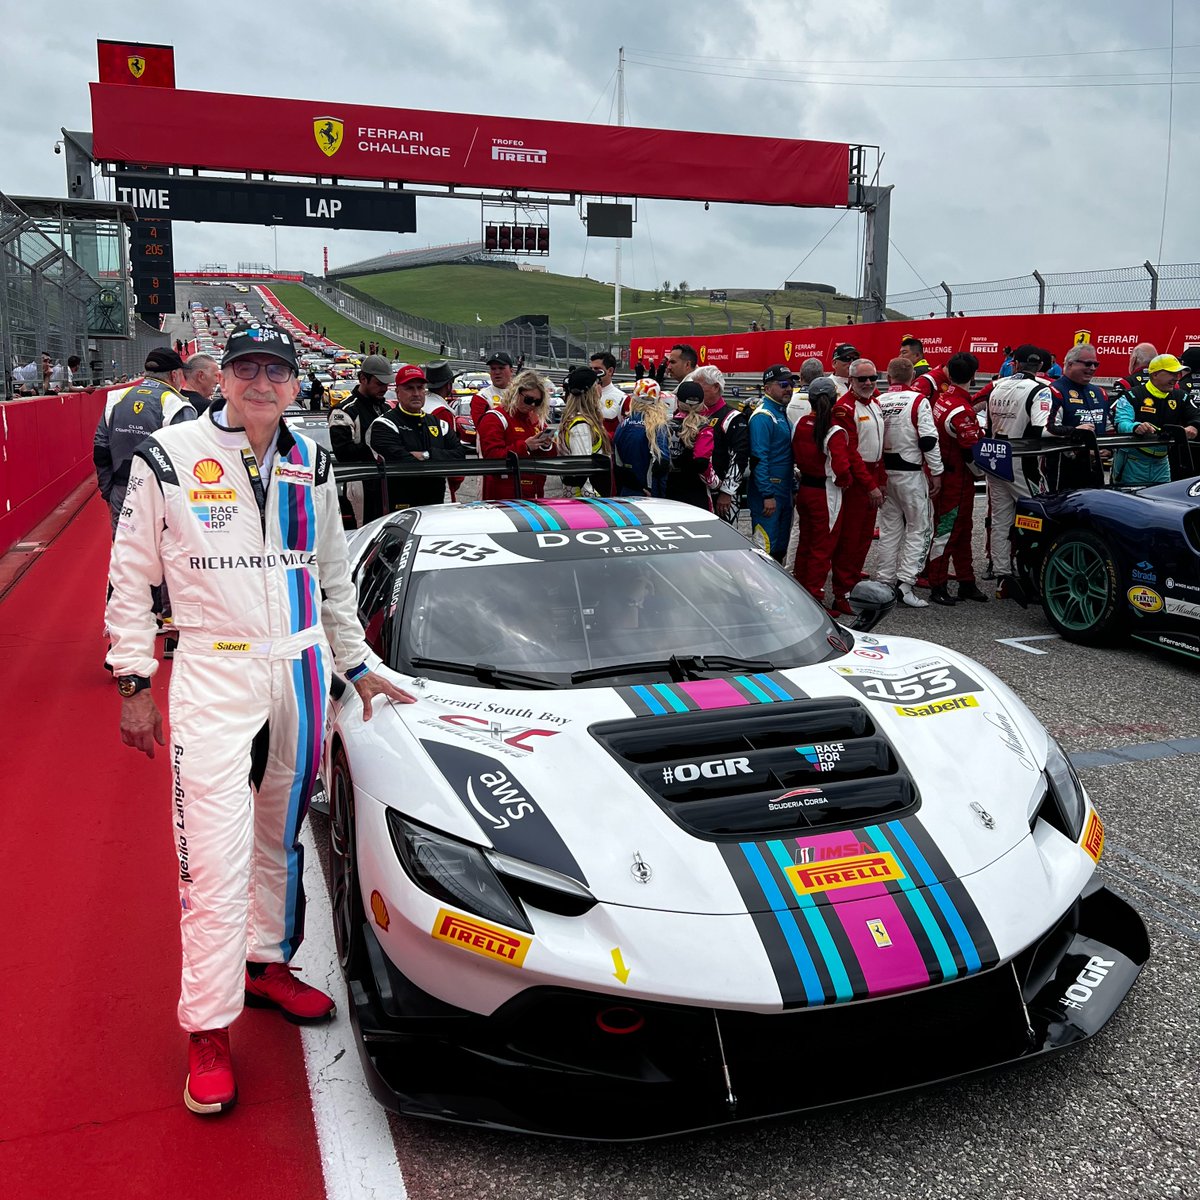 Neilio was honored to stand at the front of the Ferrari Challenge North America grid at Circuit of the Americas with the No. 153 Race for RP Ferrari 296. #RaceForRP #RelapsingPolychondritis #FerrariChallenge @FerrariRaces @RP_Organization @COTA